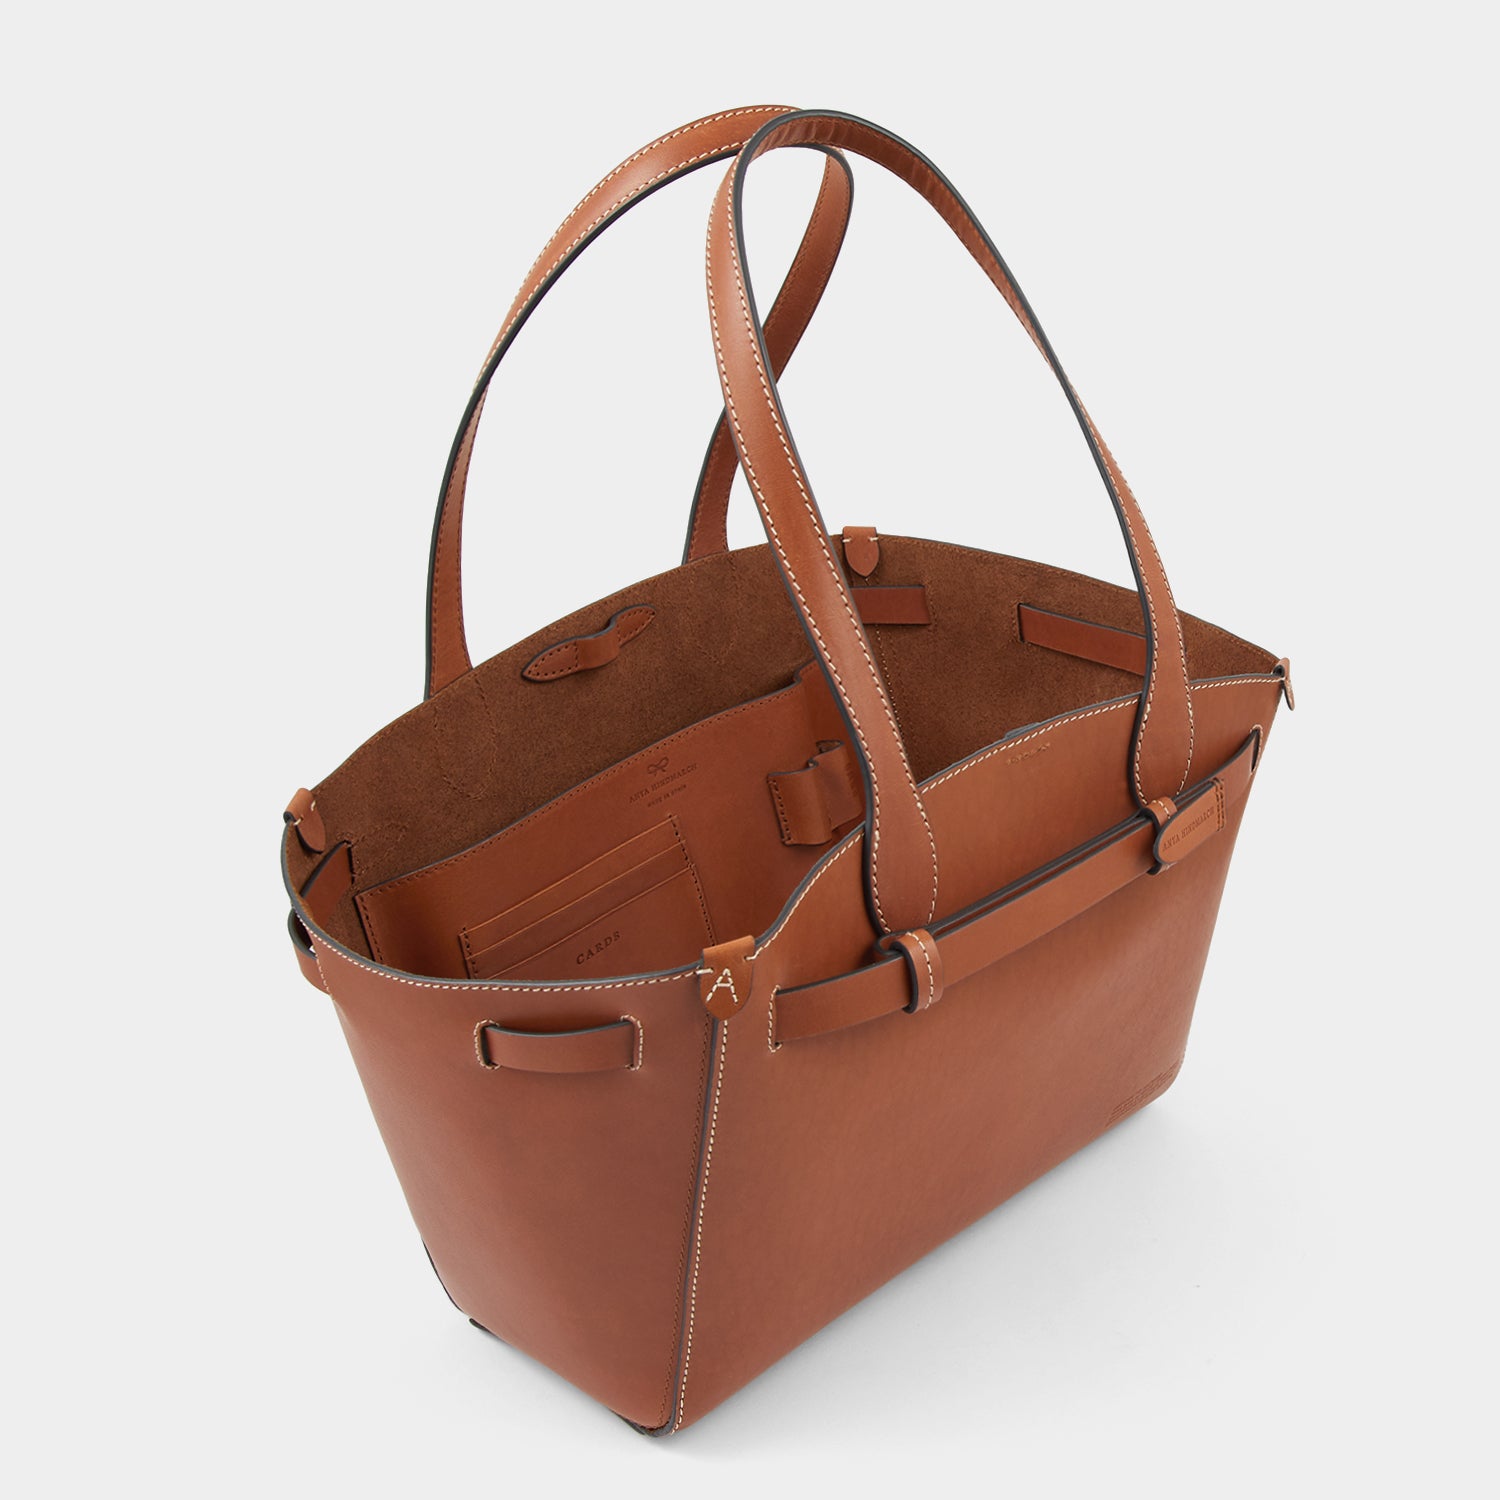 Return to Nature Tote Small -

                  
                    Compostable Leather in Tan -
                  

                  Anya Hindmarch UK
